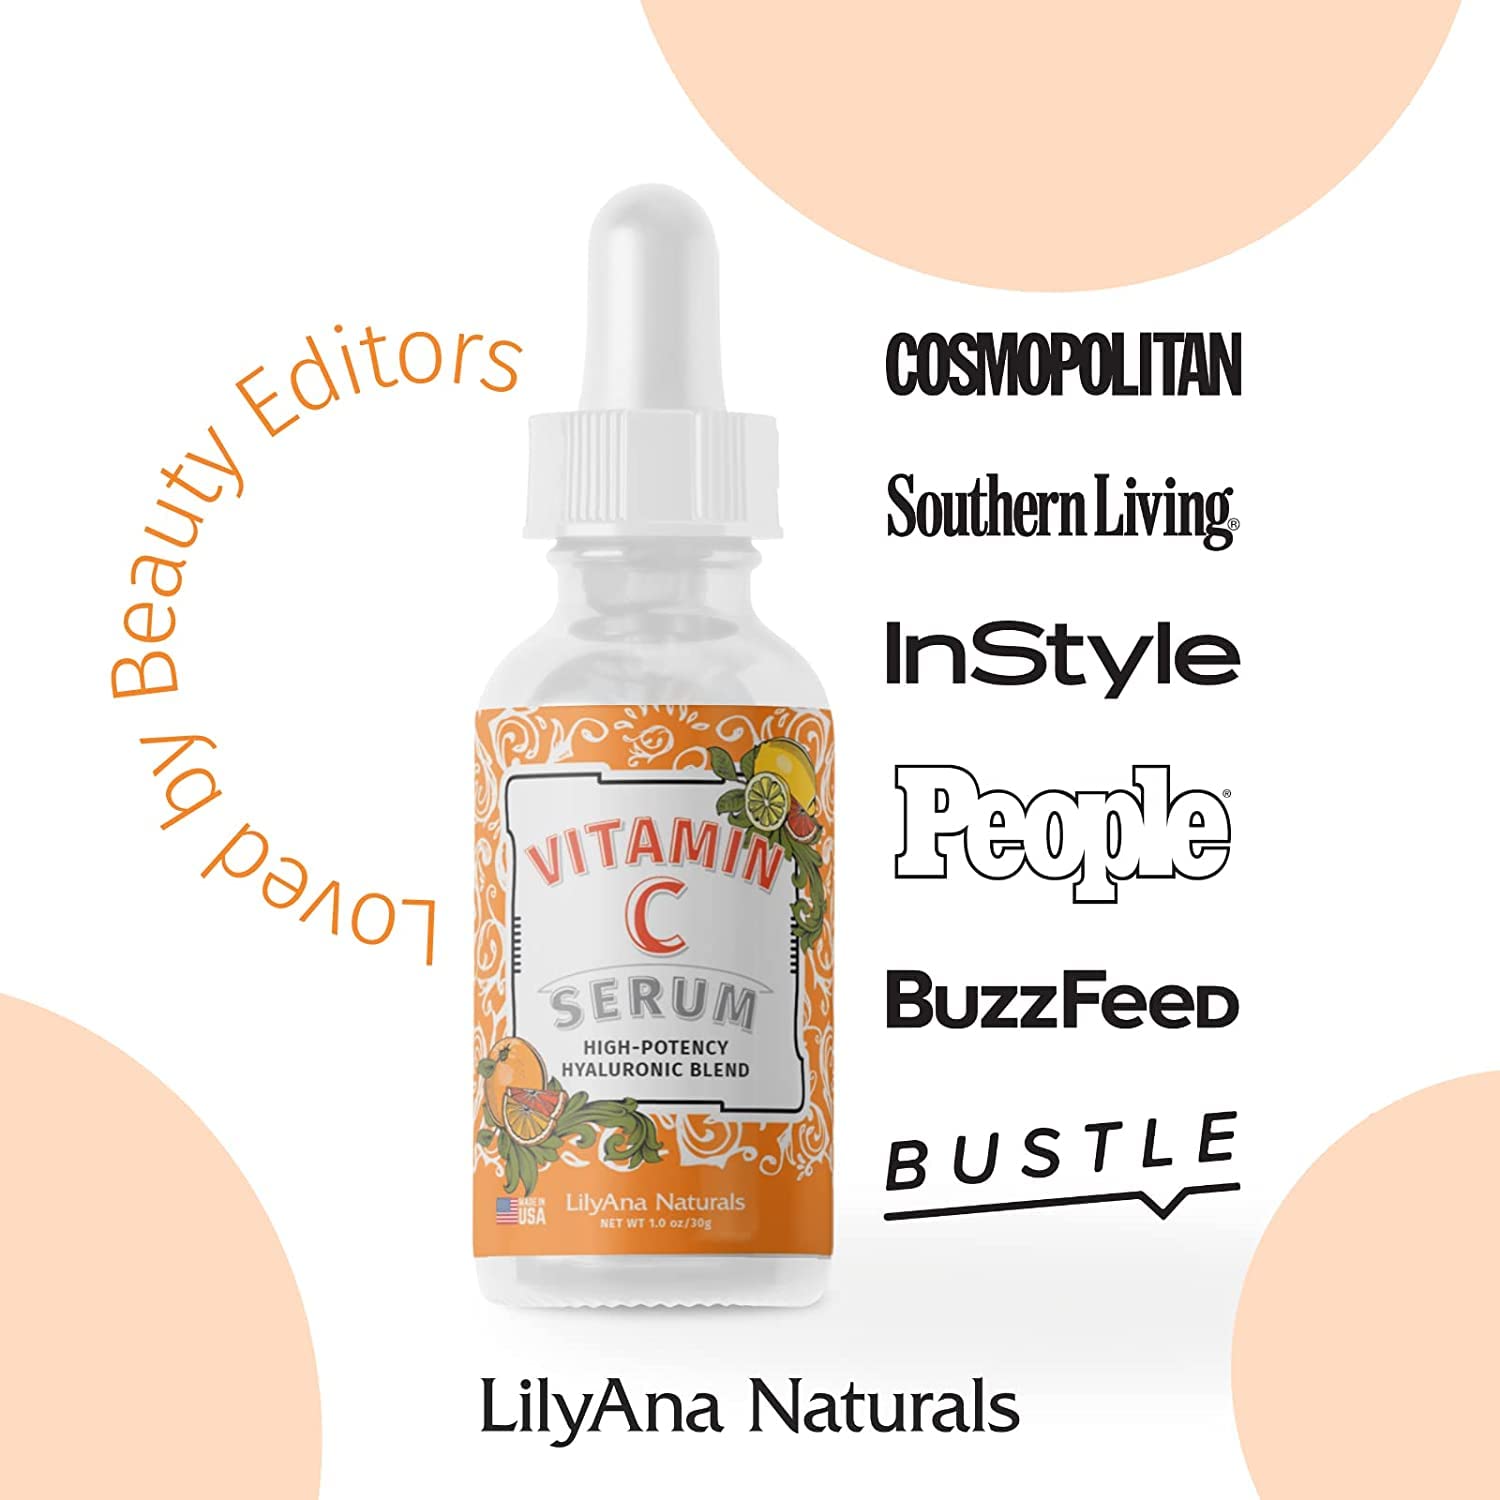 LilyAna Naturals Vitamin C Serum for Face - Face Serum with Hyaluronic Acid and Vitamin E, Anti Aging Serum, Reduces Age Spots and Sun Damage, Promotes Collagen and Elastin - 1oz